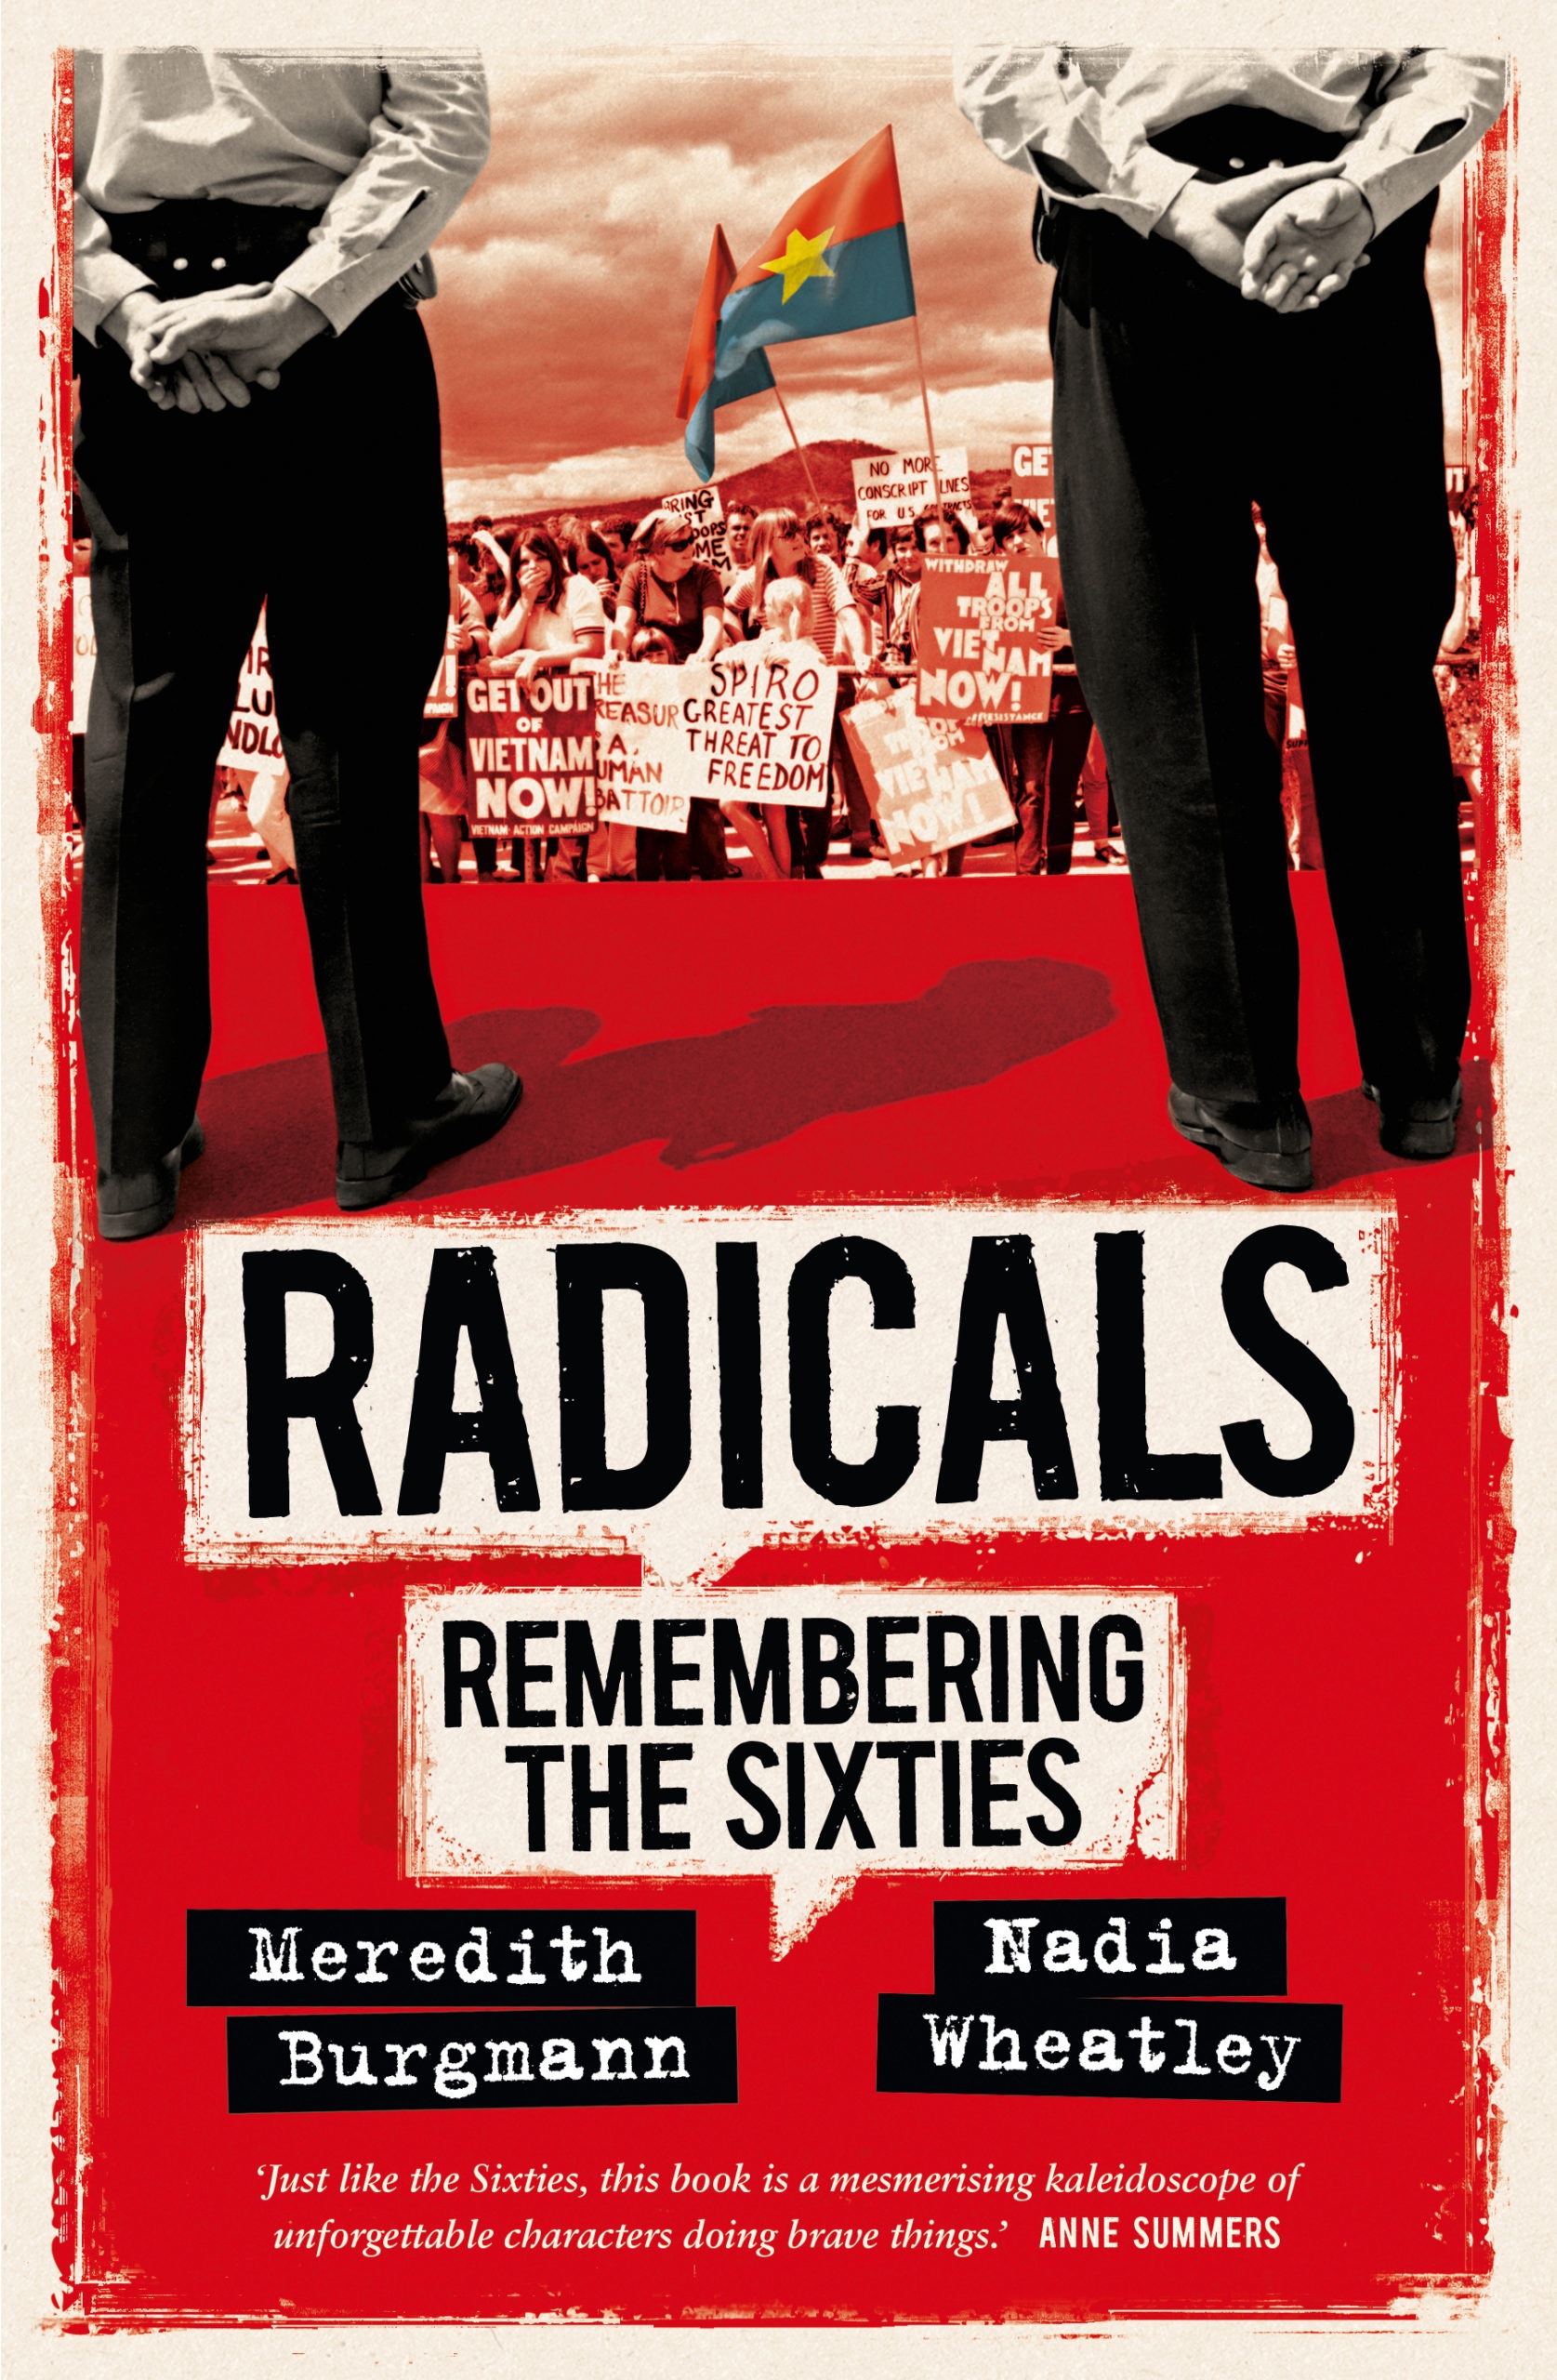 Radicals: Remembering the Sixties